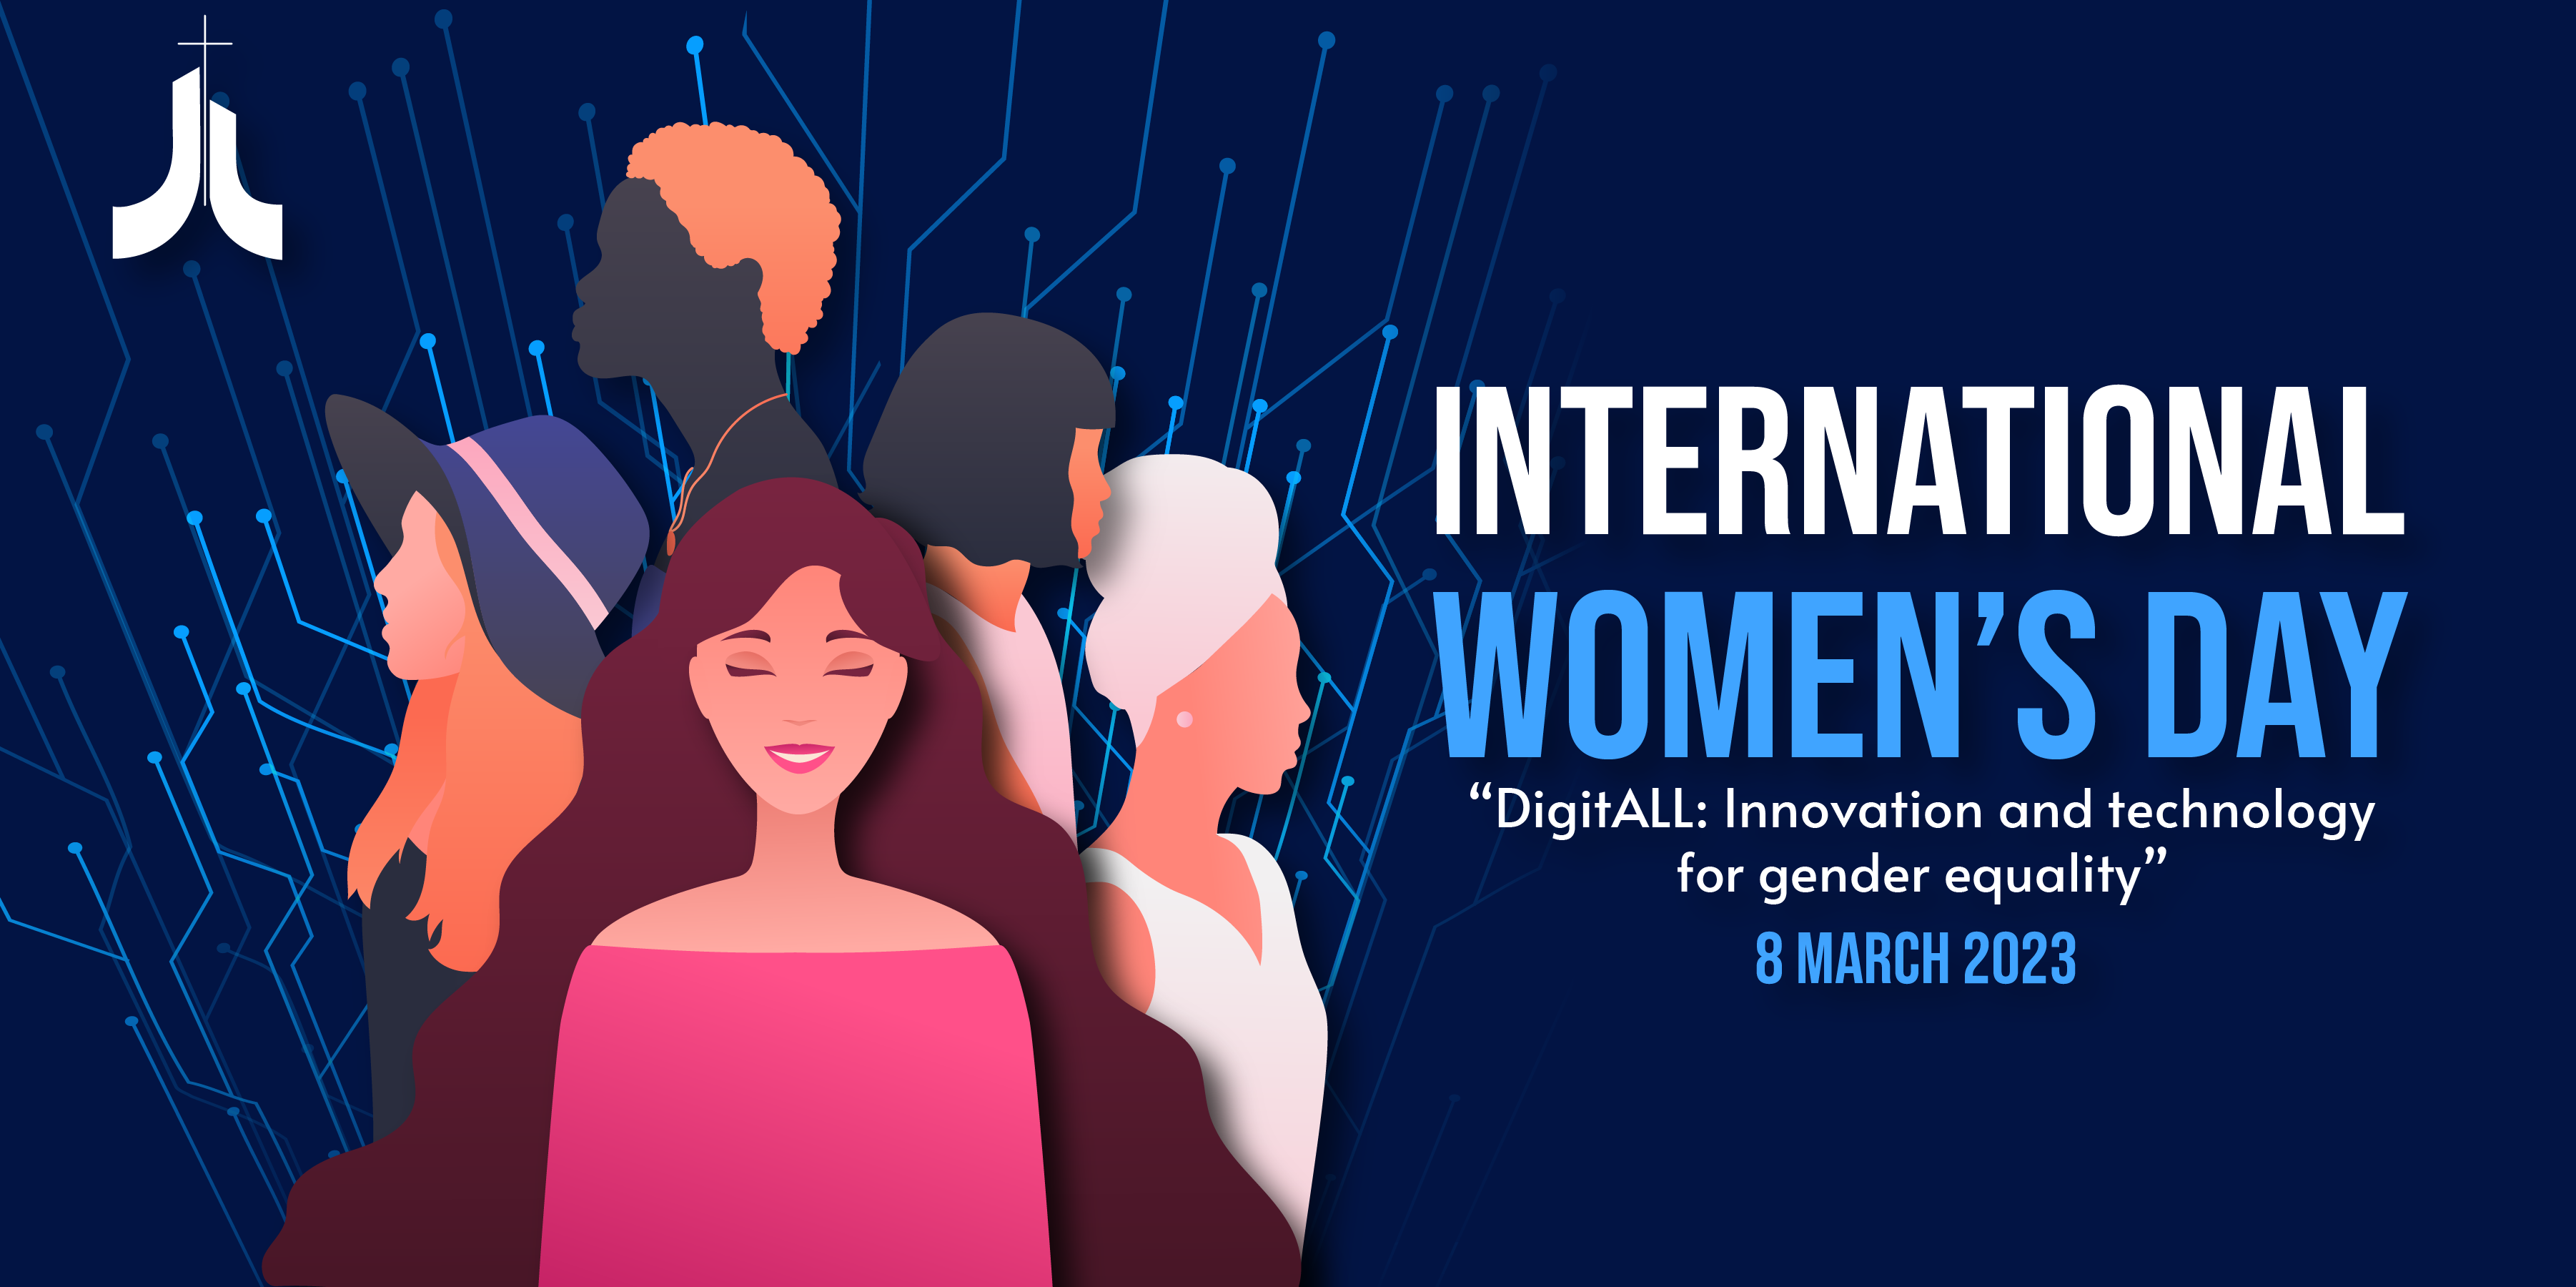 International Women's Day 2023 focuses on embracing equity and digital  technology for all – Intelligent CIO Europe